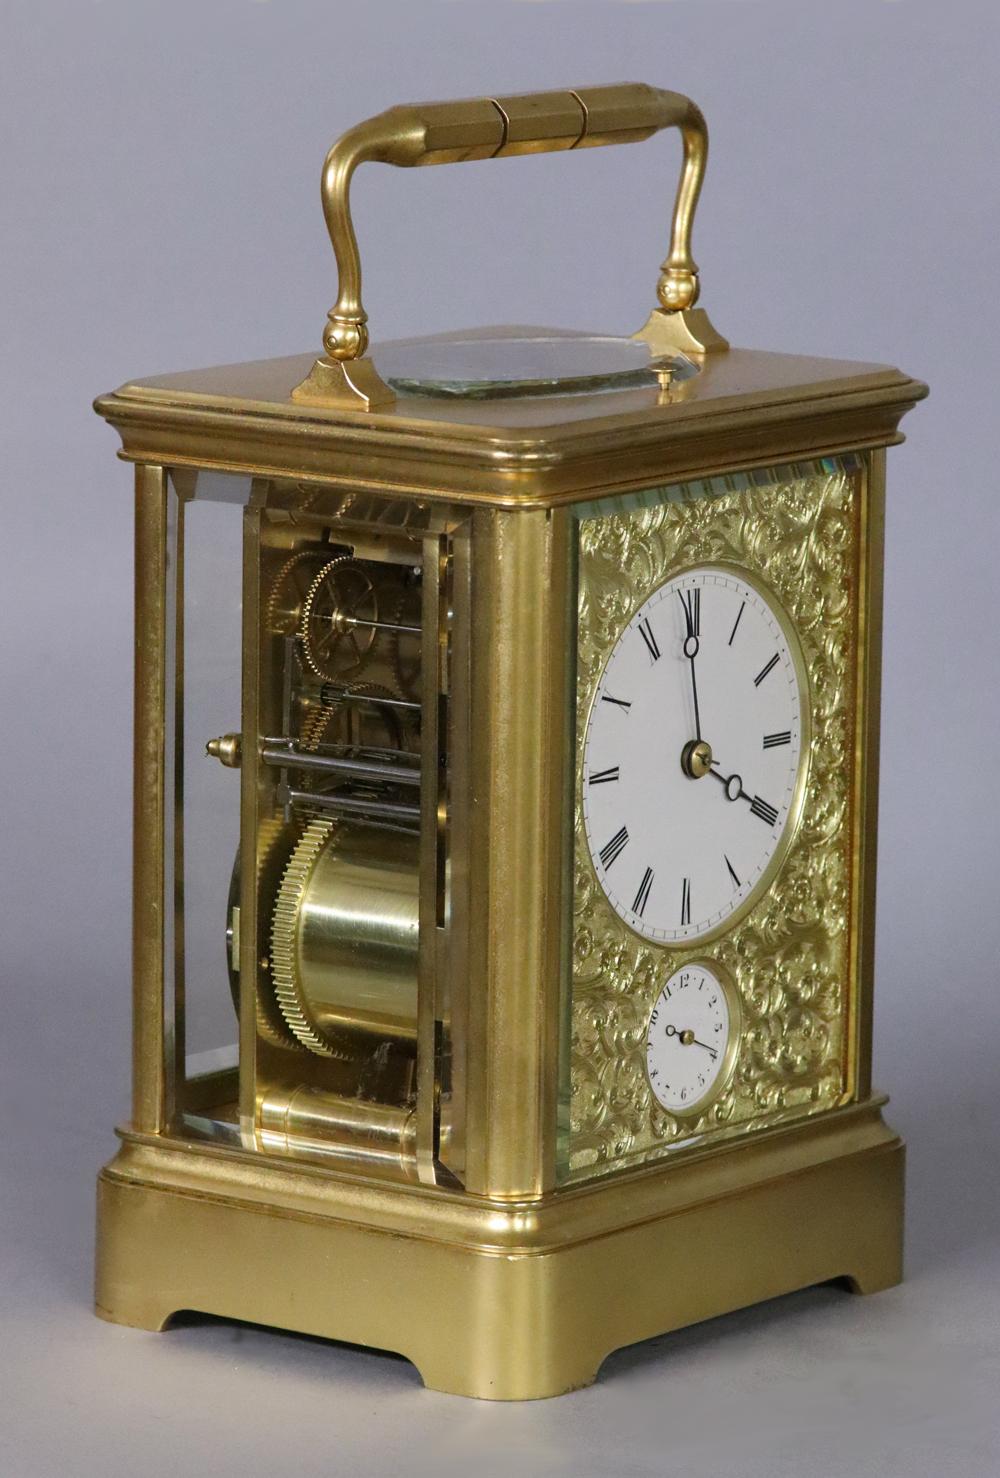 Maker: 
Drocourt, 7439.

Case: 
The large gilt-bronze early multi-piece case has a hinged handle above, beveled glasses to the sides and an oval viewing glass above.

Dial: 
The white porcelain dials for the hours and alarm have Roman